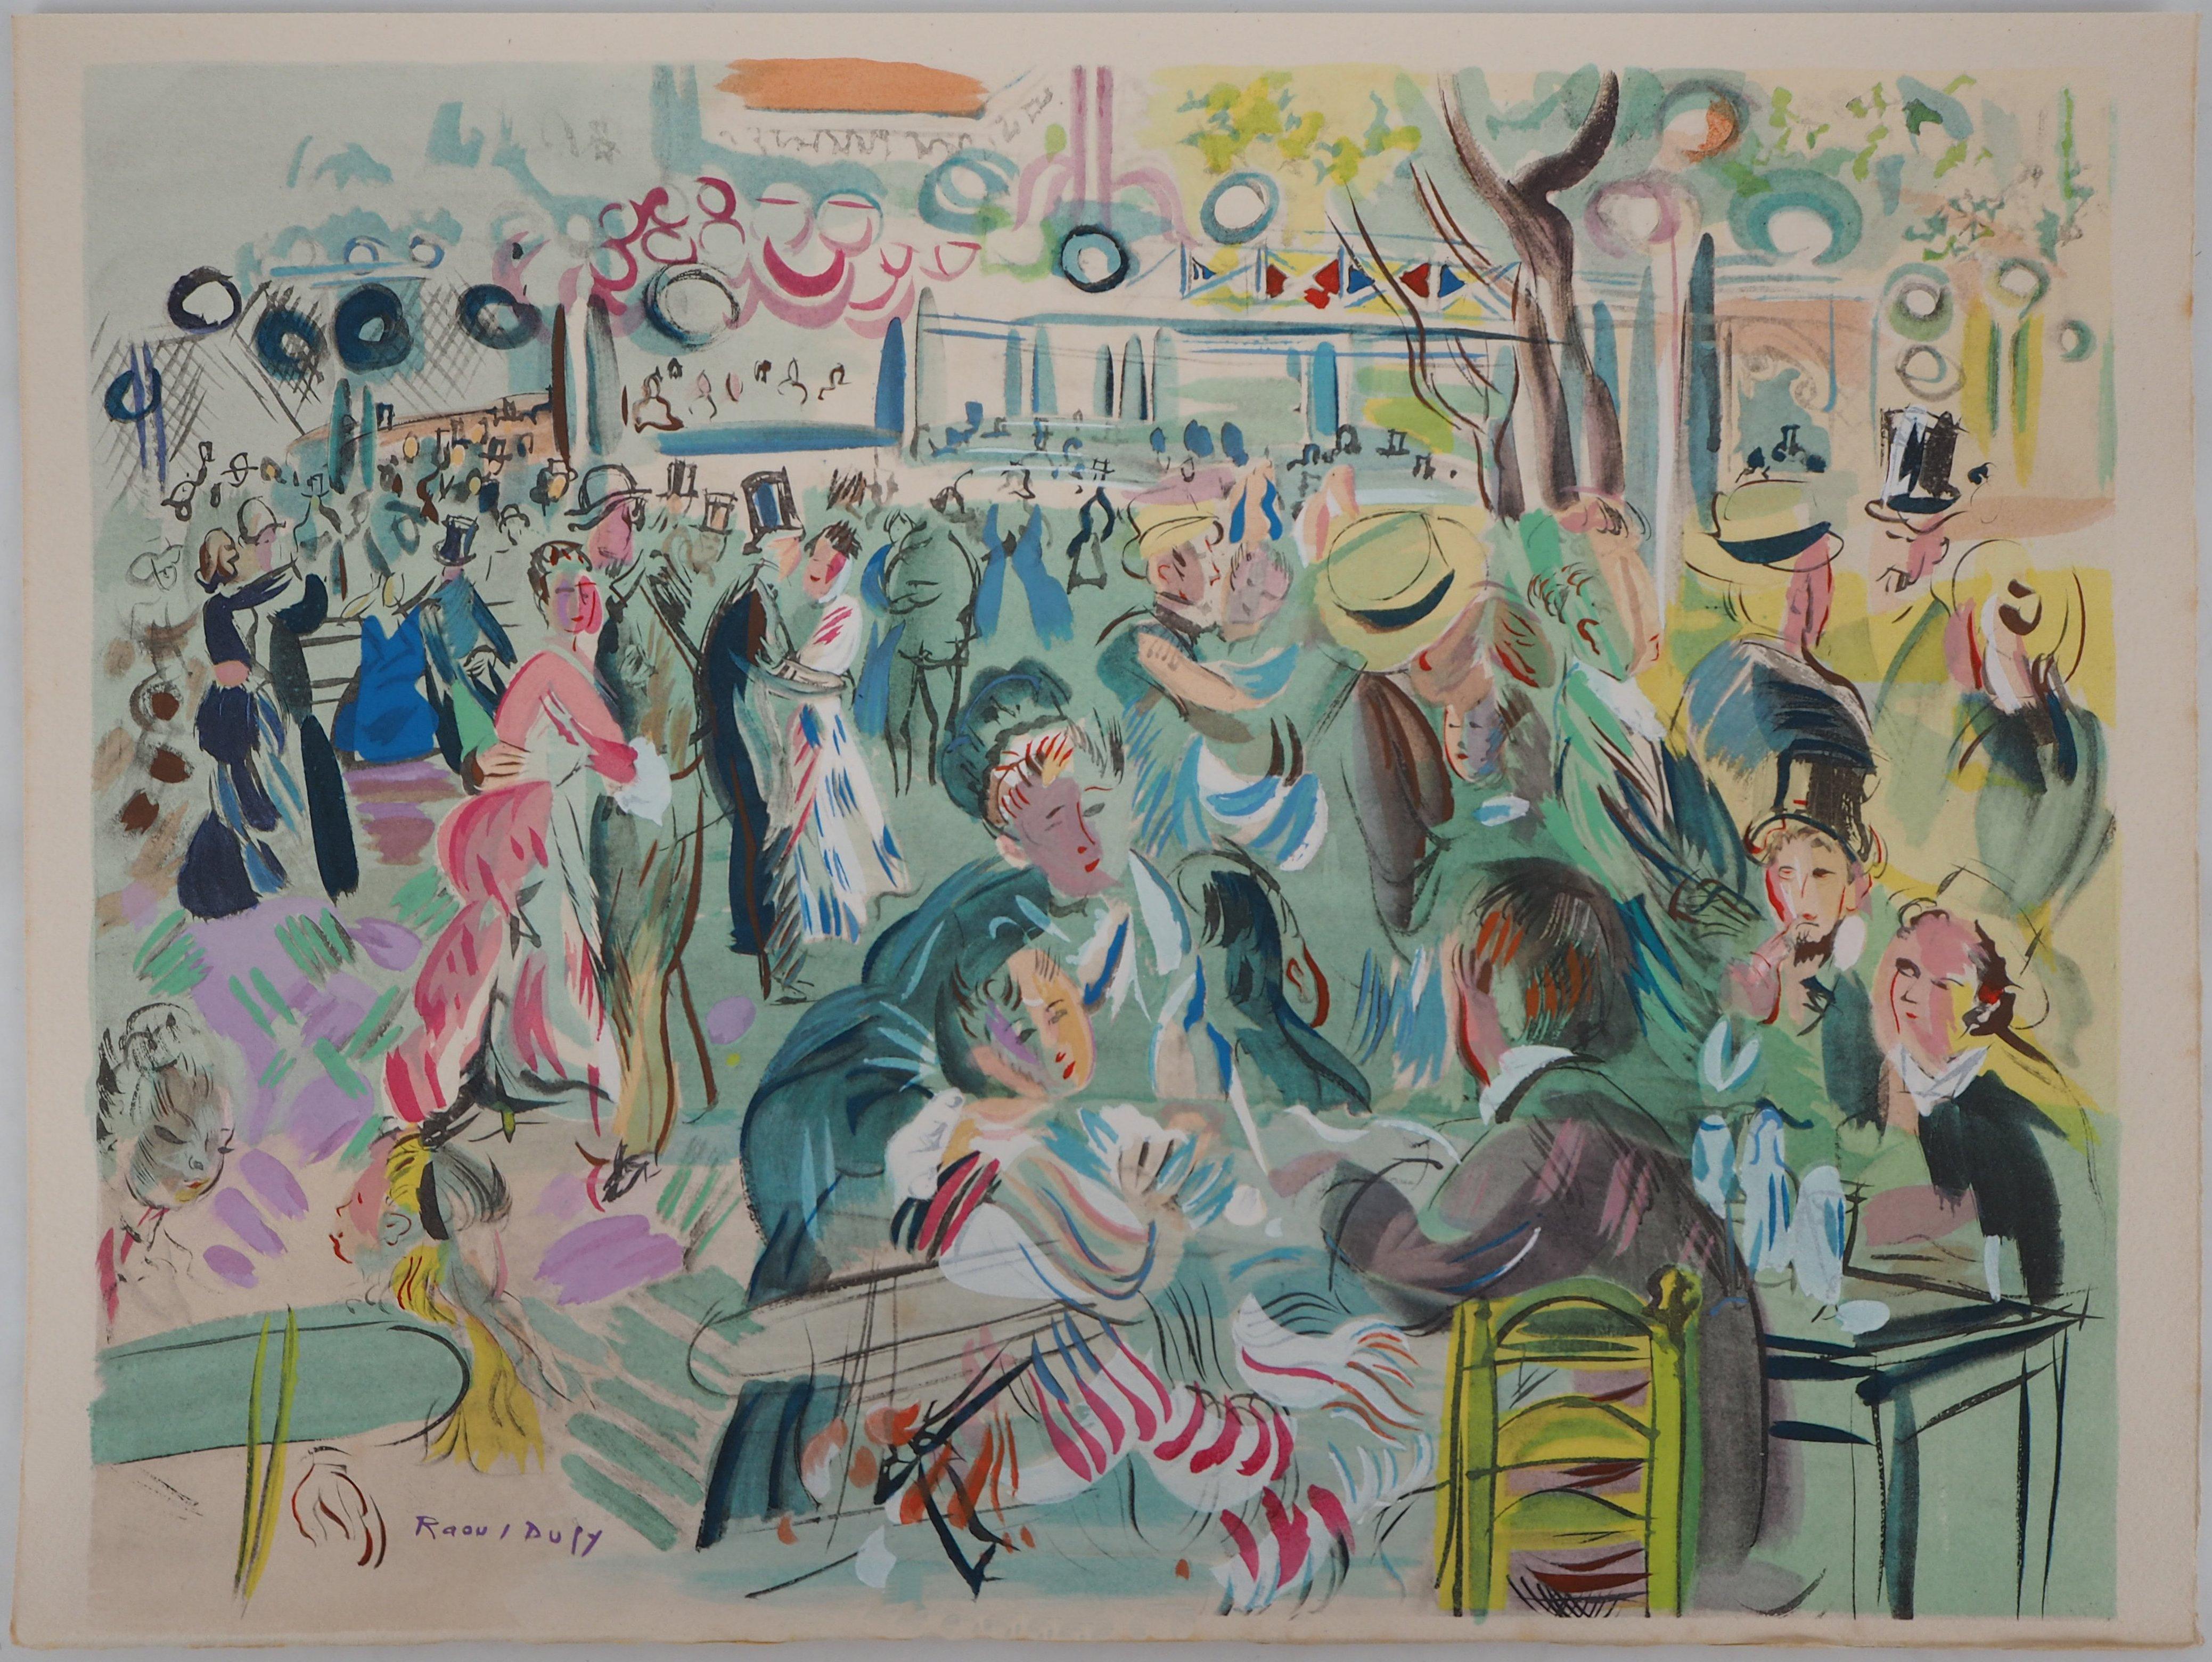 Tribute to Renoir : Dancing Cafe - Original Lithograph - Modern Print by Raoul Dufy